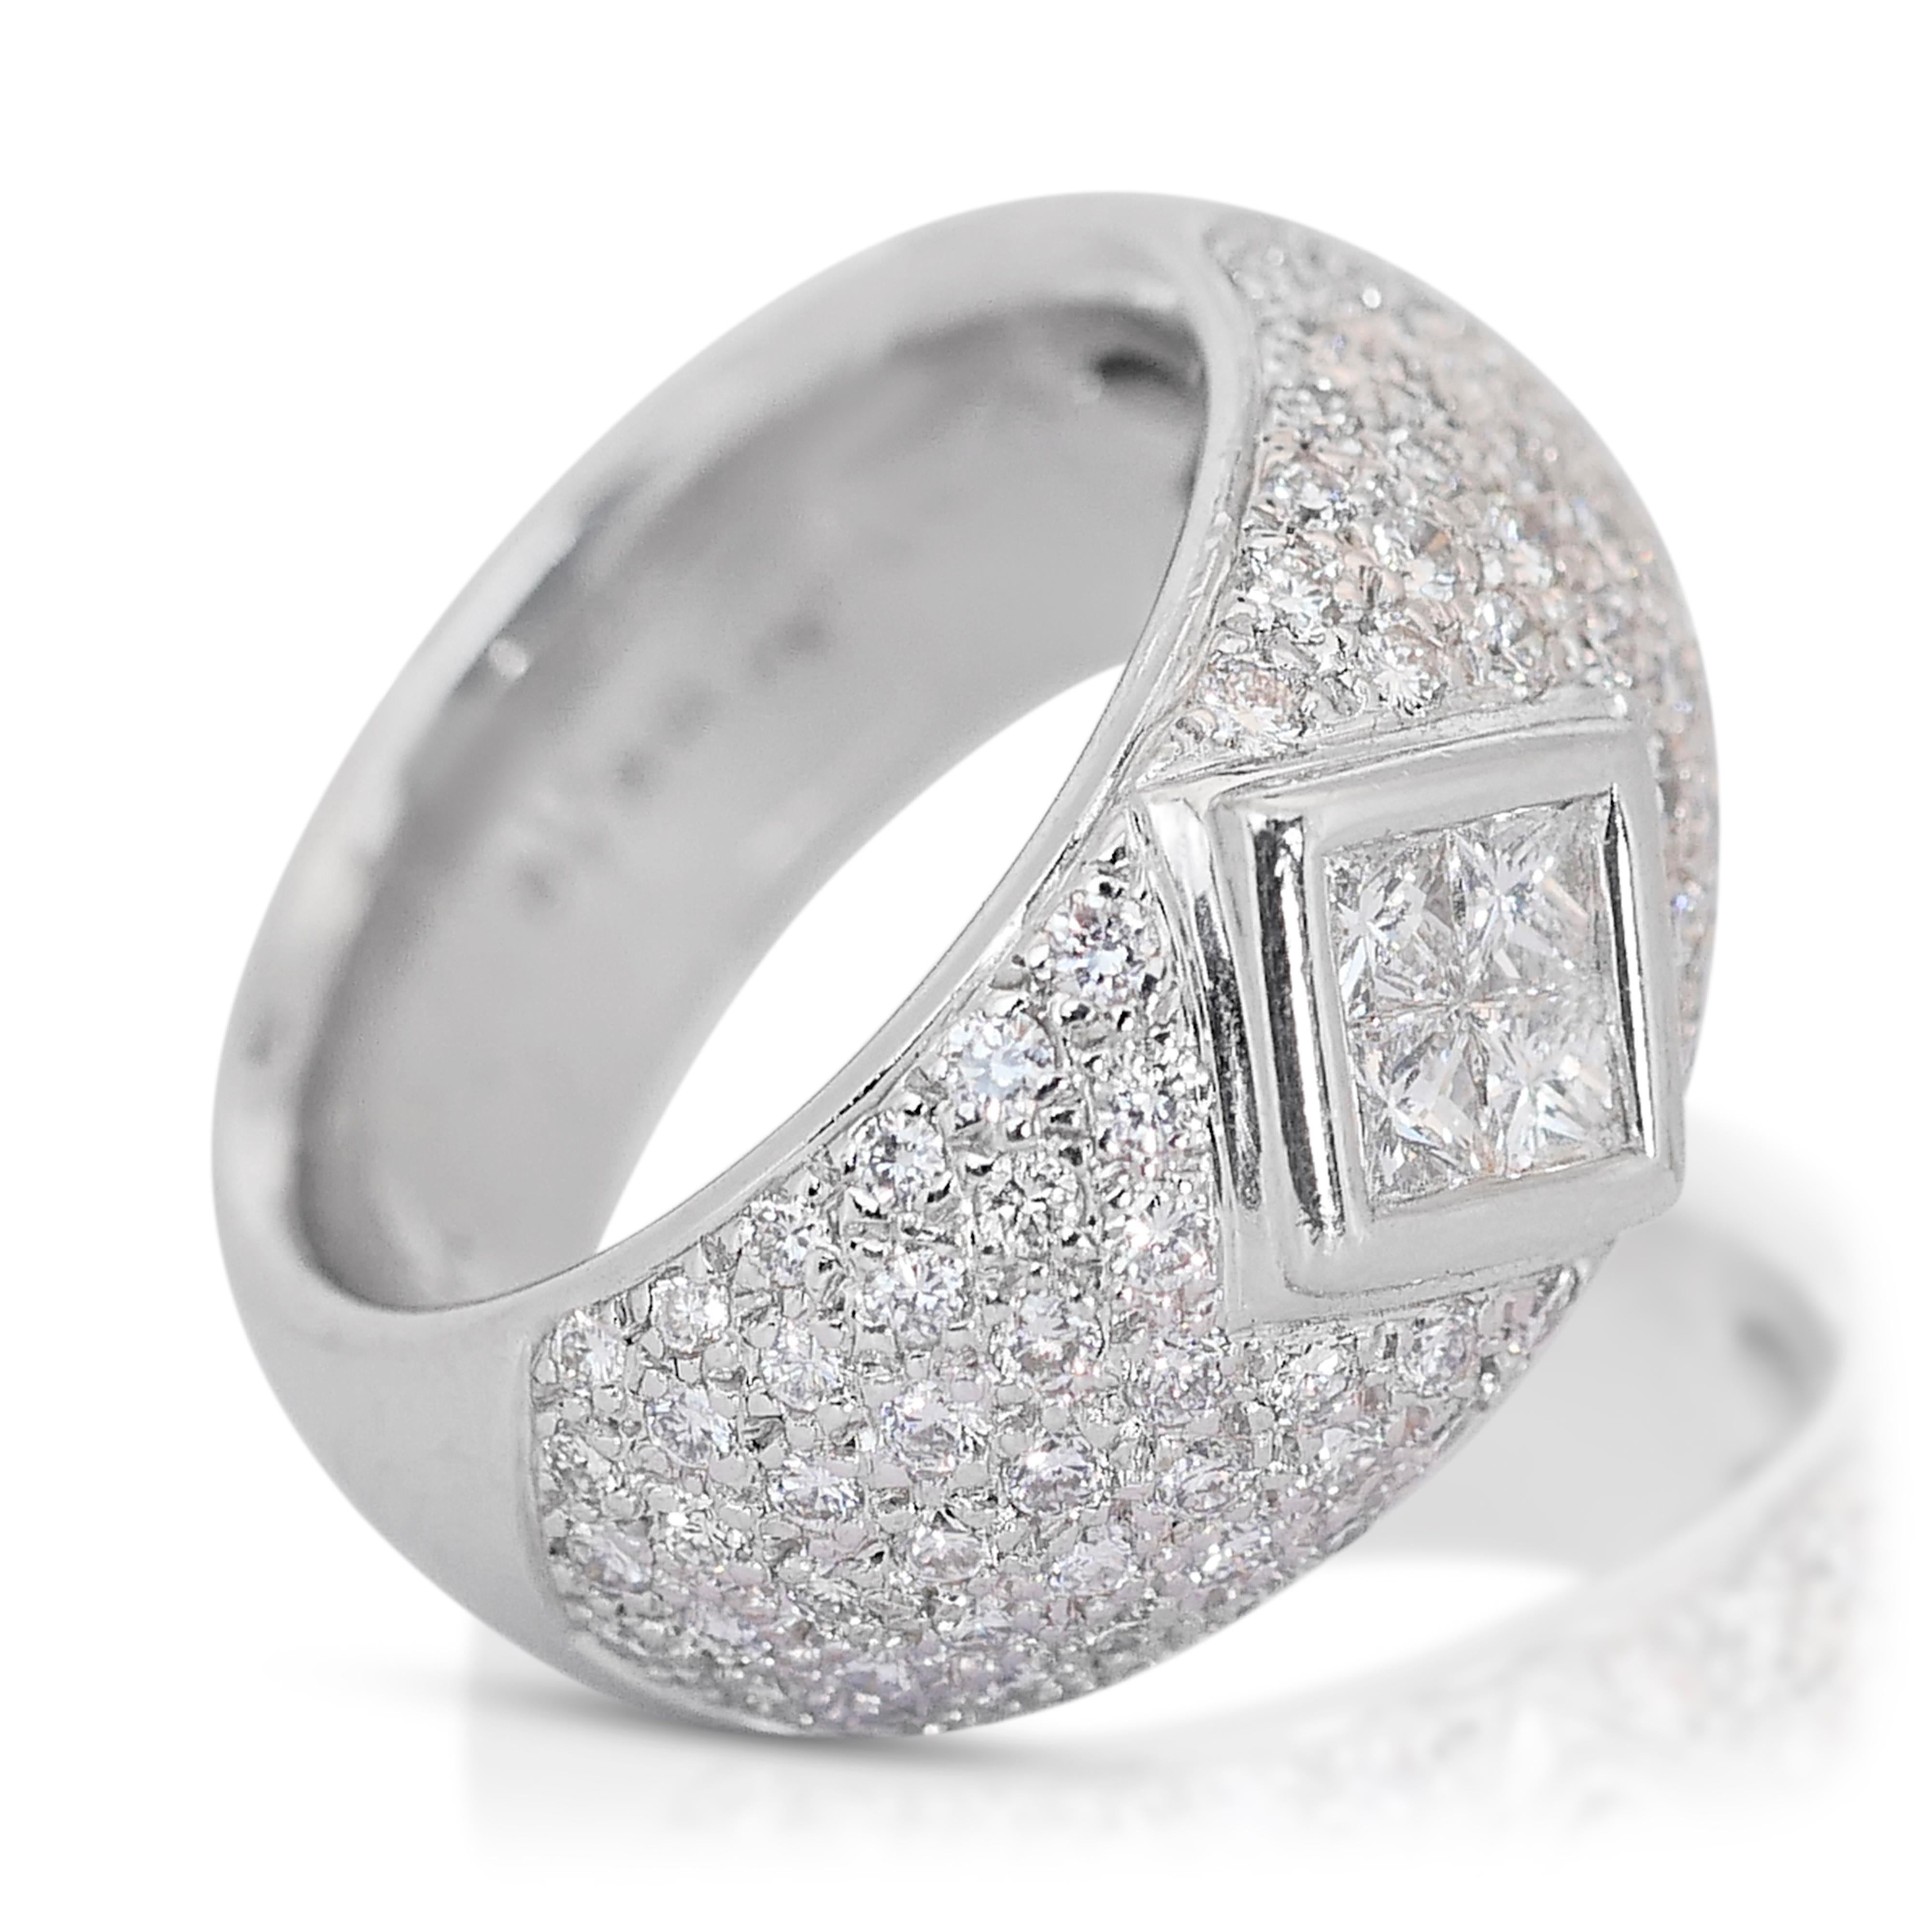 Stunning 3.15 ct Diamond Dome Ring in 18k White Gold - IGI Certified

Elevate your jewelry collection with this stunning diamond dome ring, a testament to elegance and precision craftsmanship. This magnificent piece features a quartet of